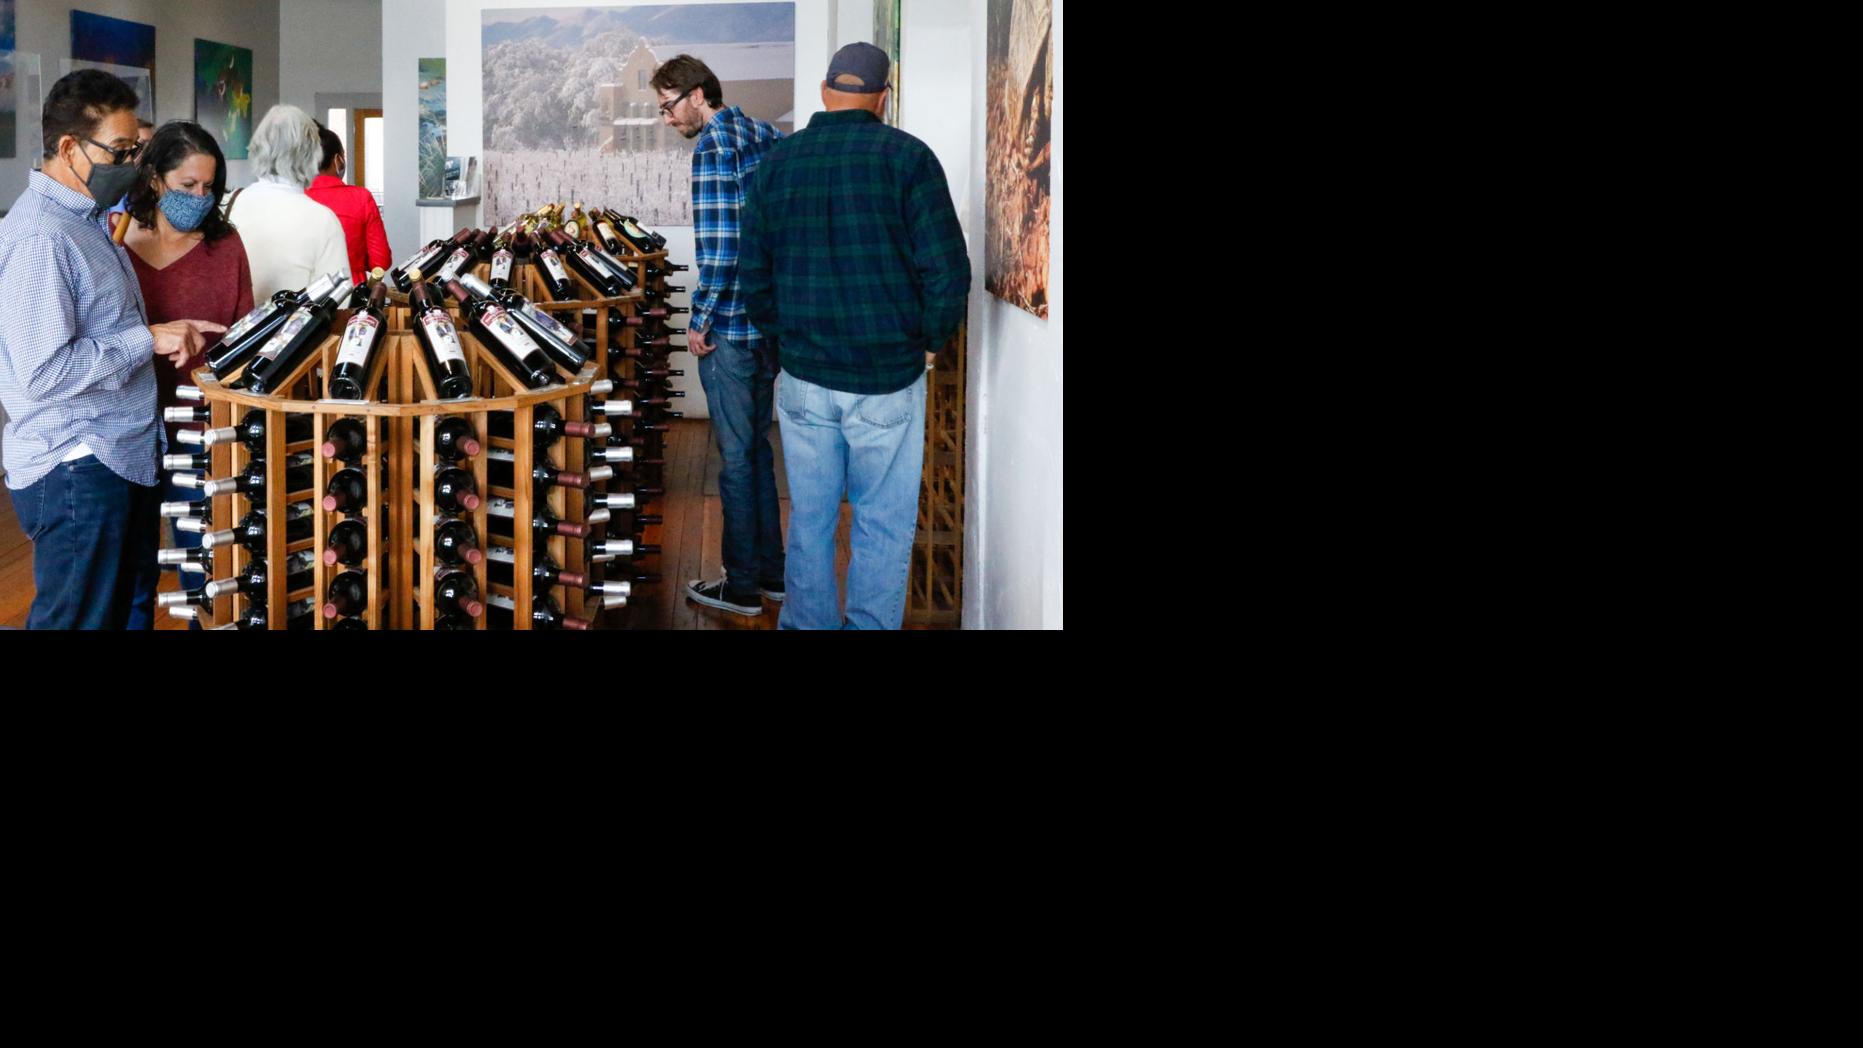 Wine is divine in COVID times: Southern Arizona industry sees dramatic uptick